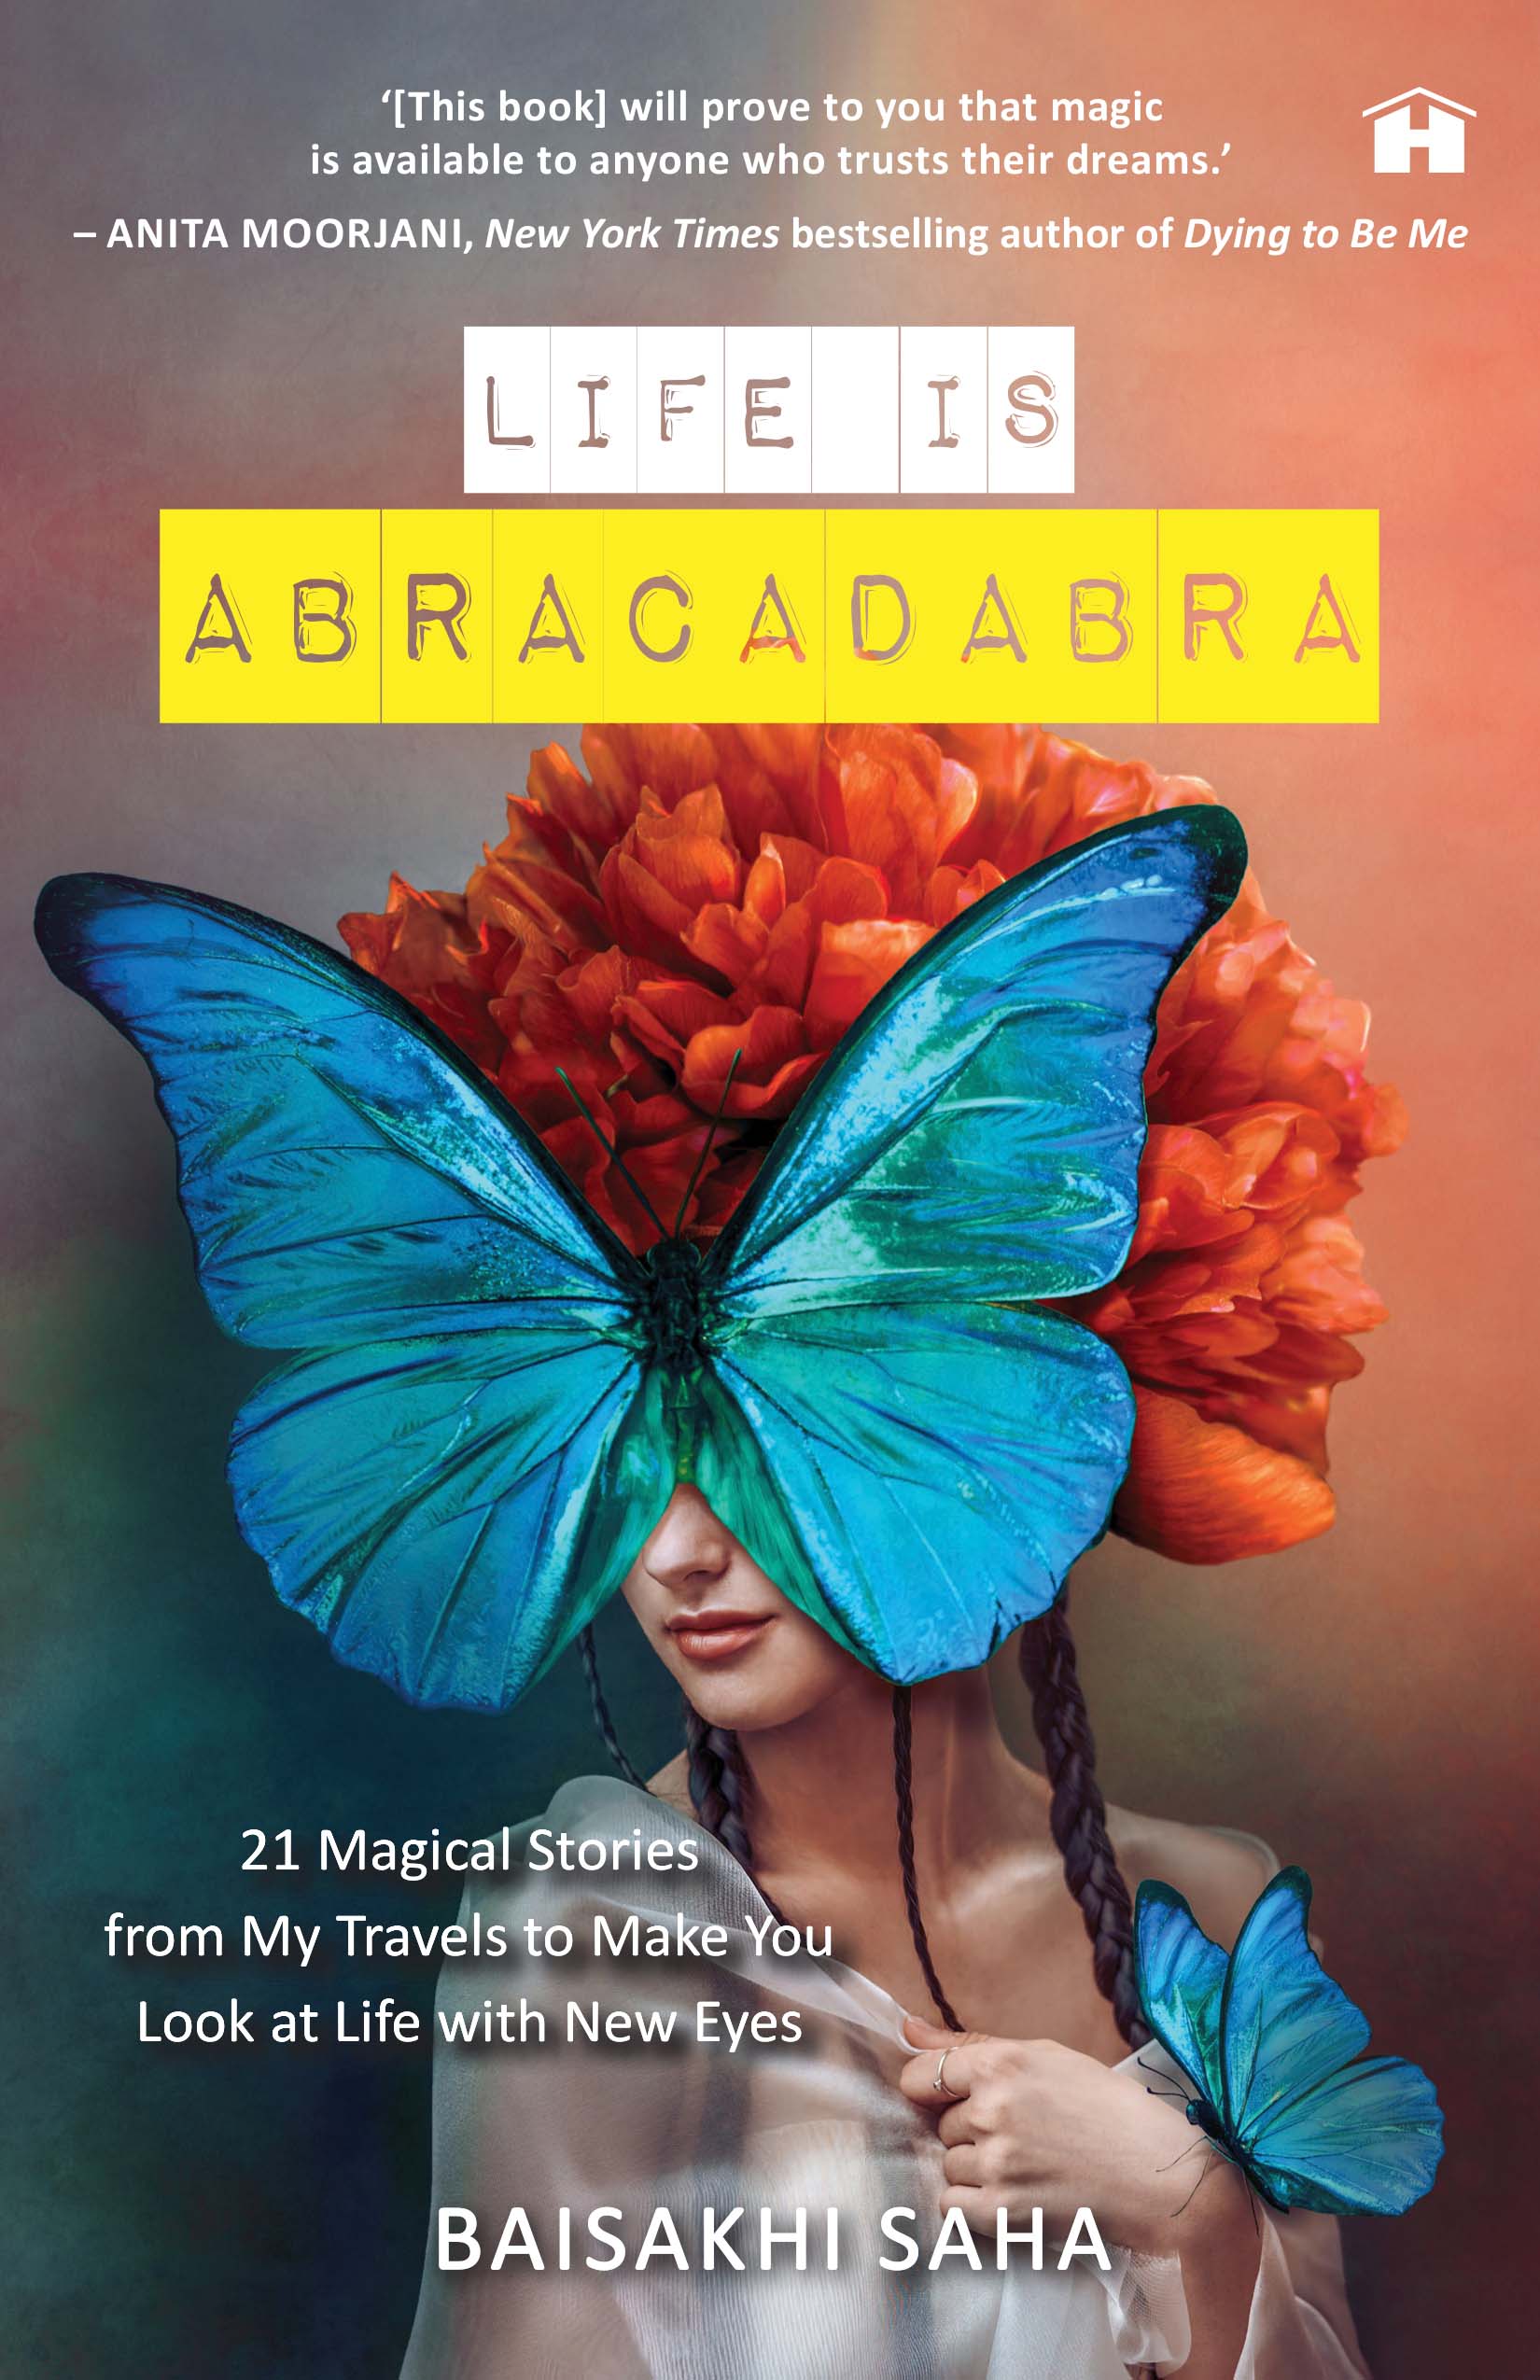 You are currently viewing Author Baisakhi Saha presented excerpts from her book ‘Life is Abracadabra’ – 21 Magical Travel Stories